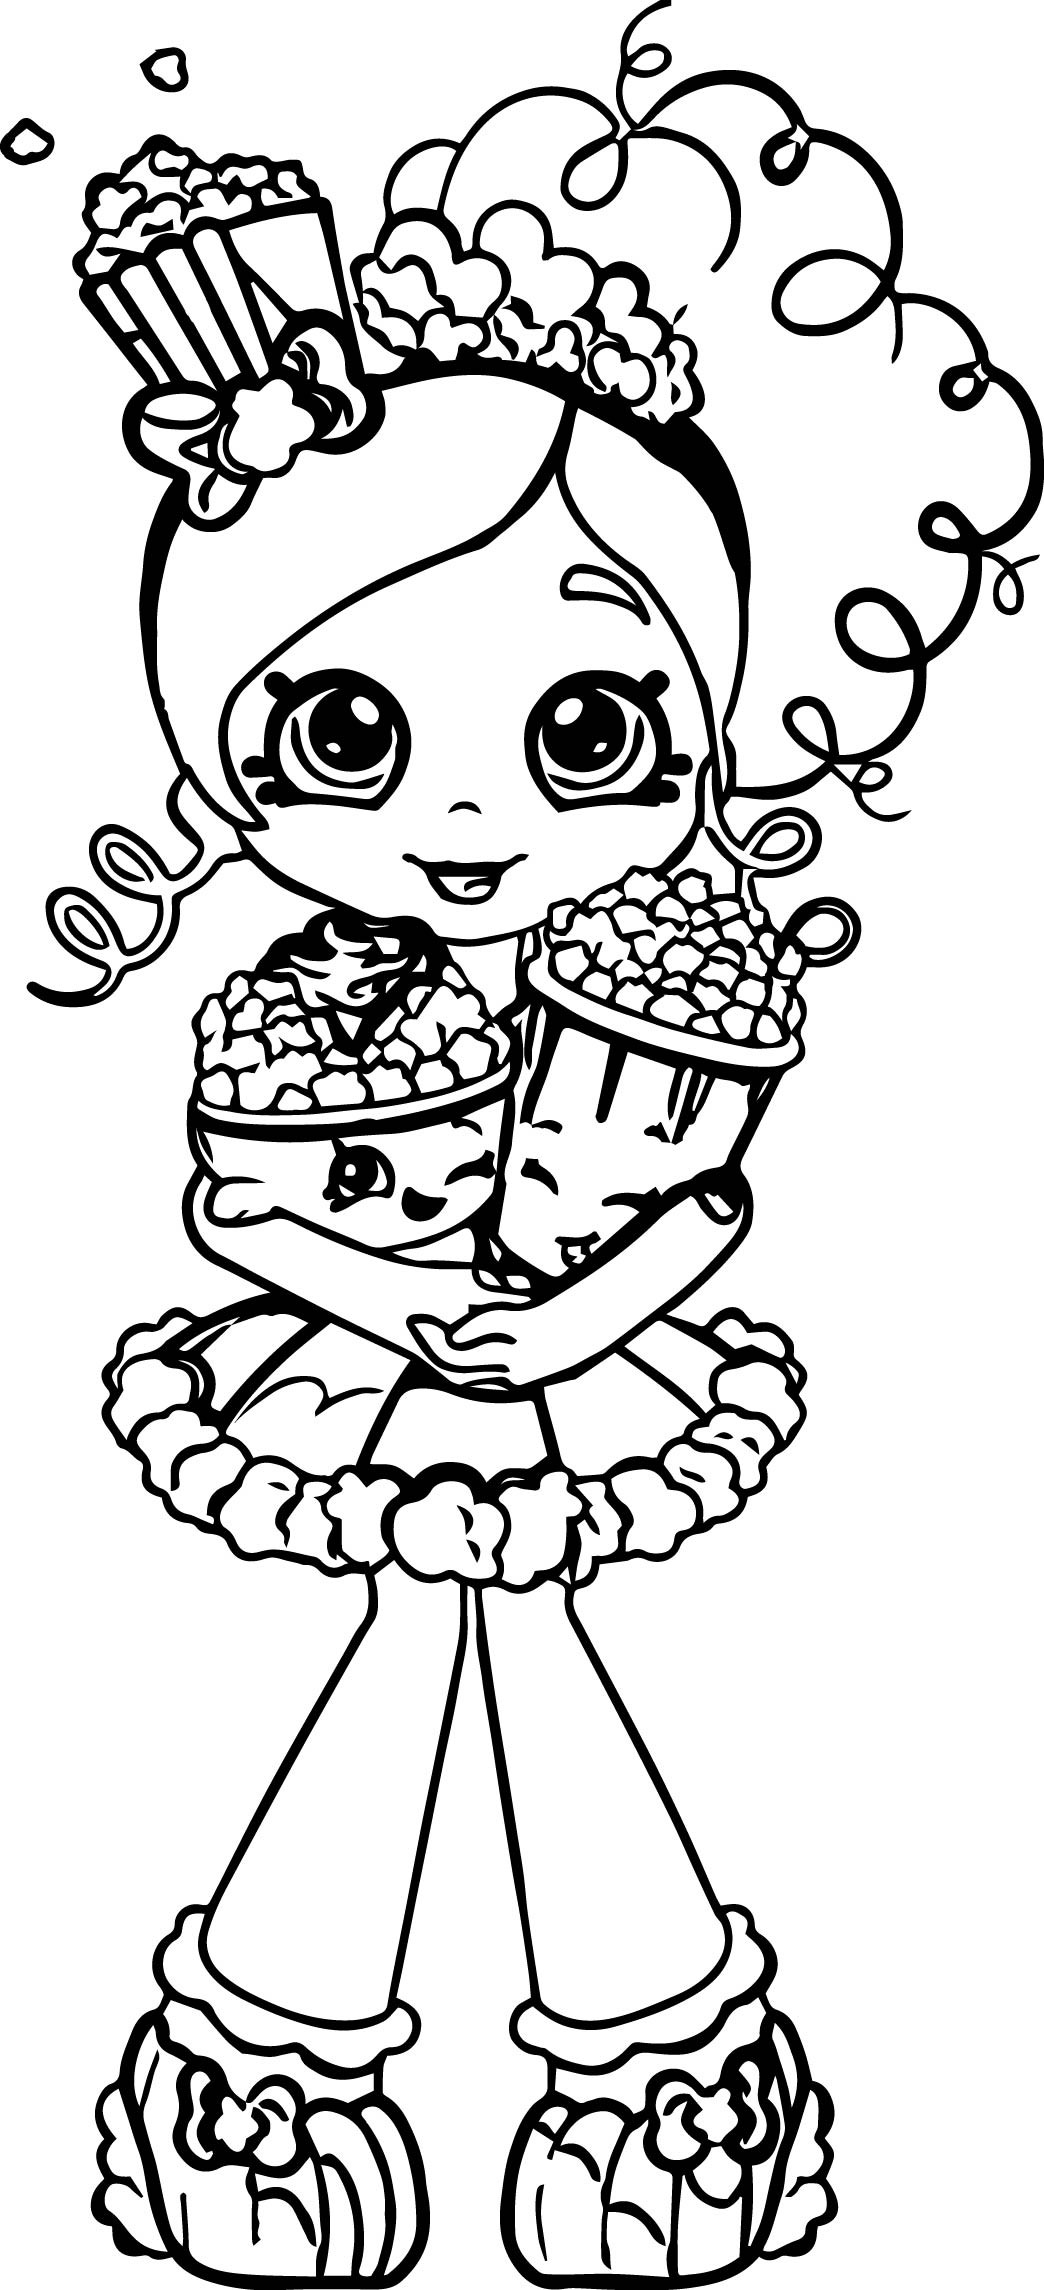 Shopkins Girls Coloring Pages
 Popcorn Shopkins Girl Coloring Page